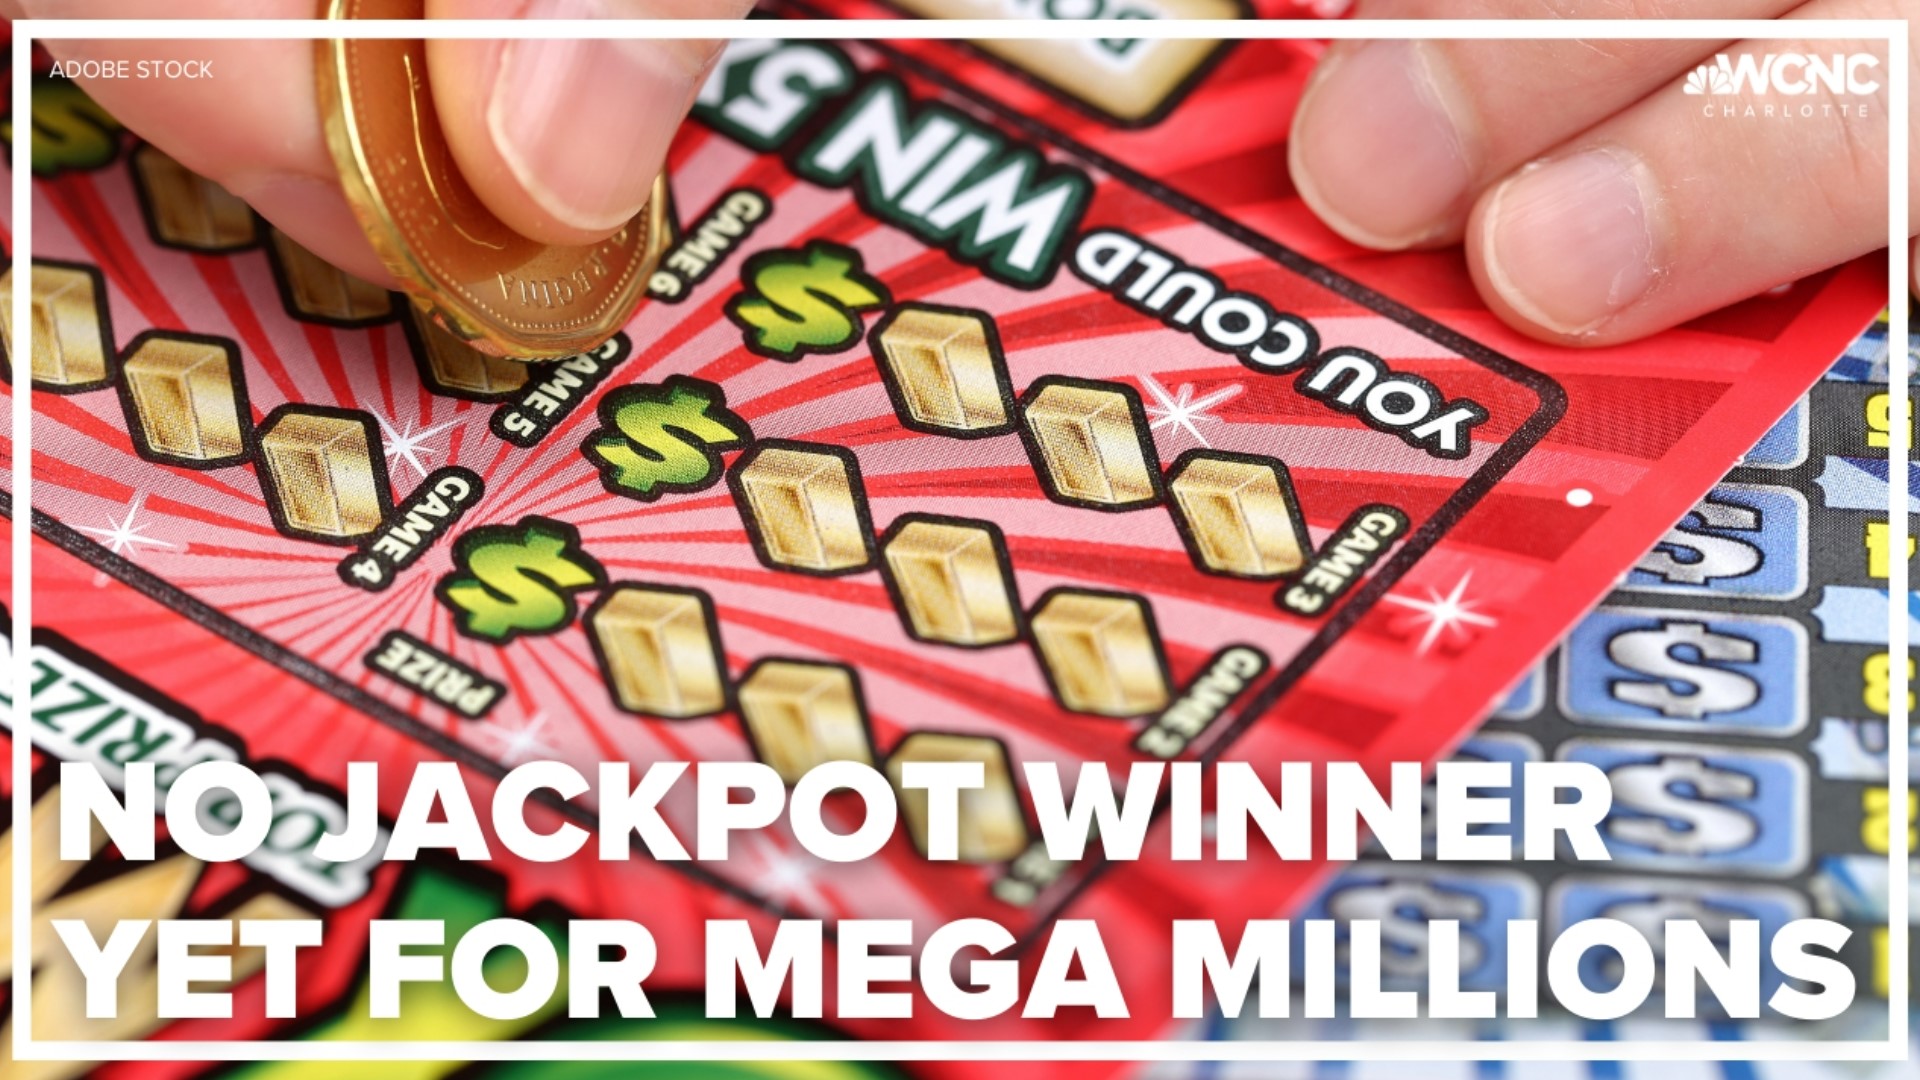 Someone in Gastonia won 1 million dollars in last night's Mega Millions drawing. The winning ticket was sold at the Lake Wylie Mini Mart on Union Road.